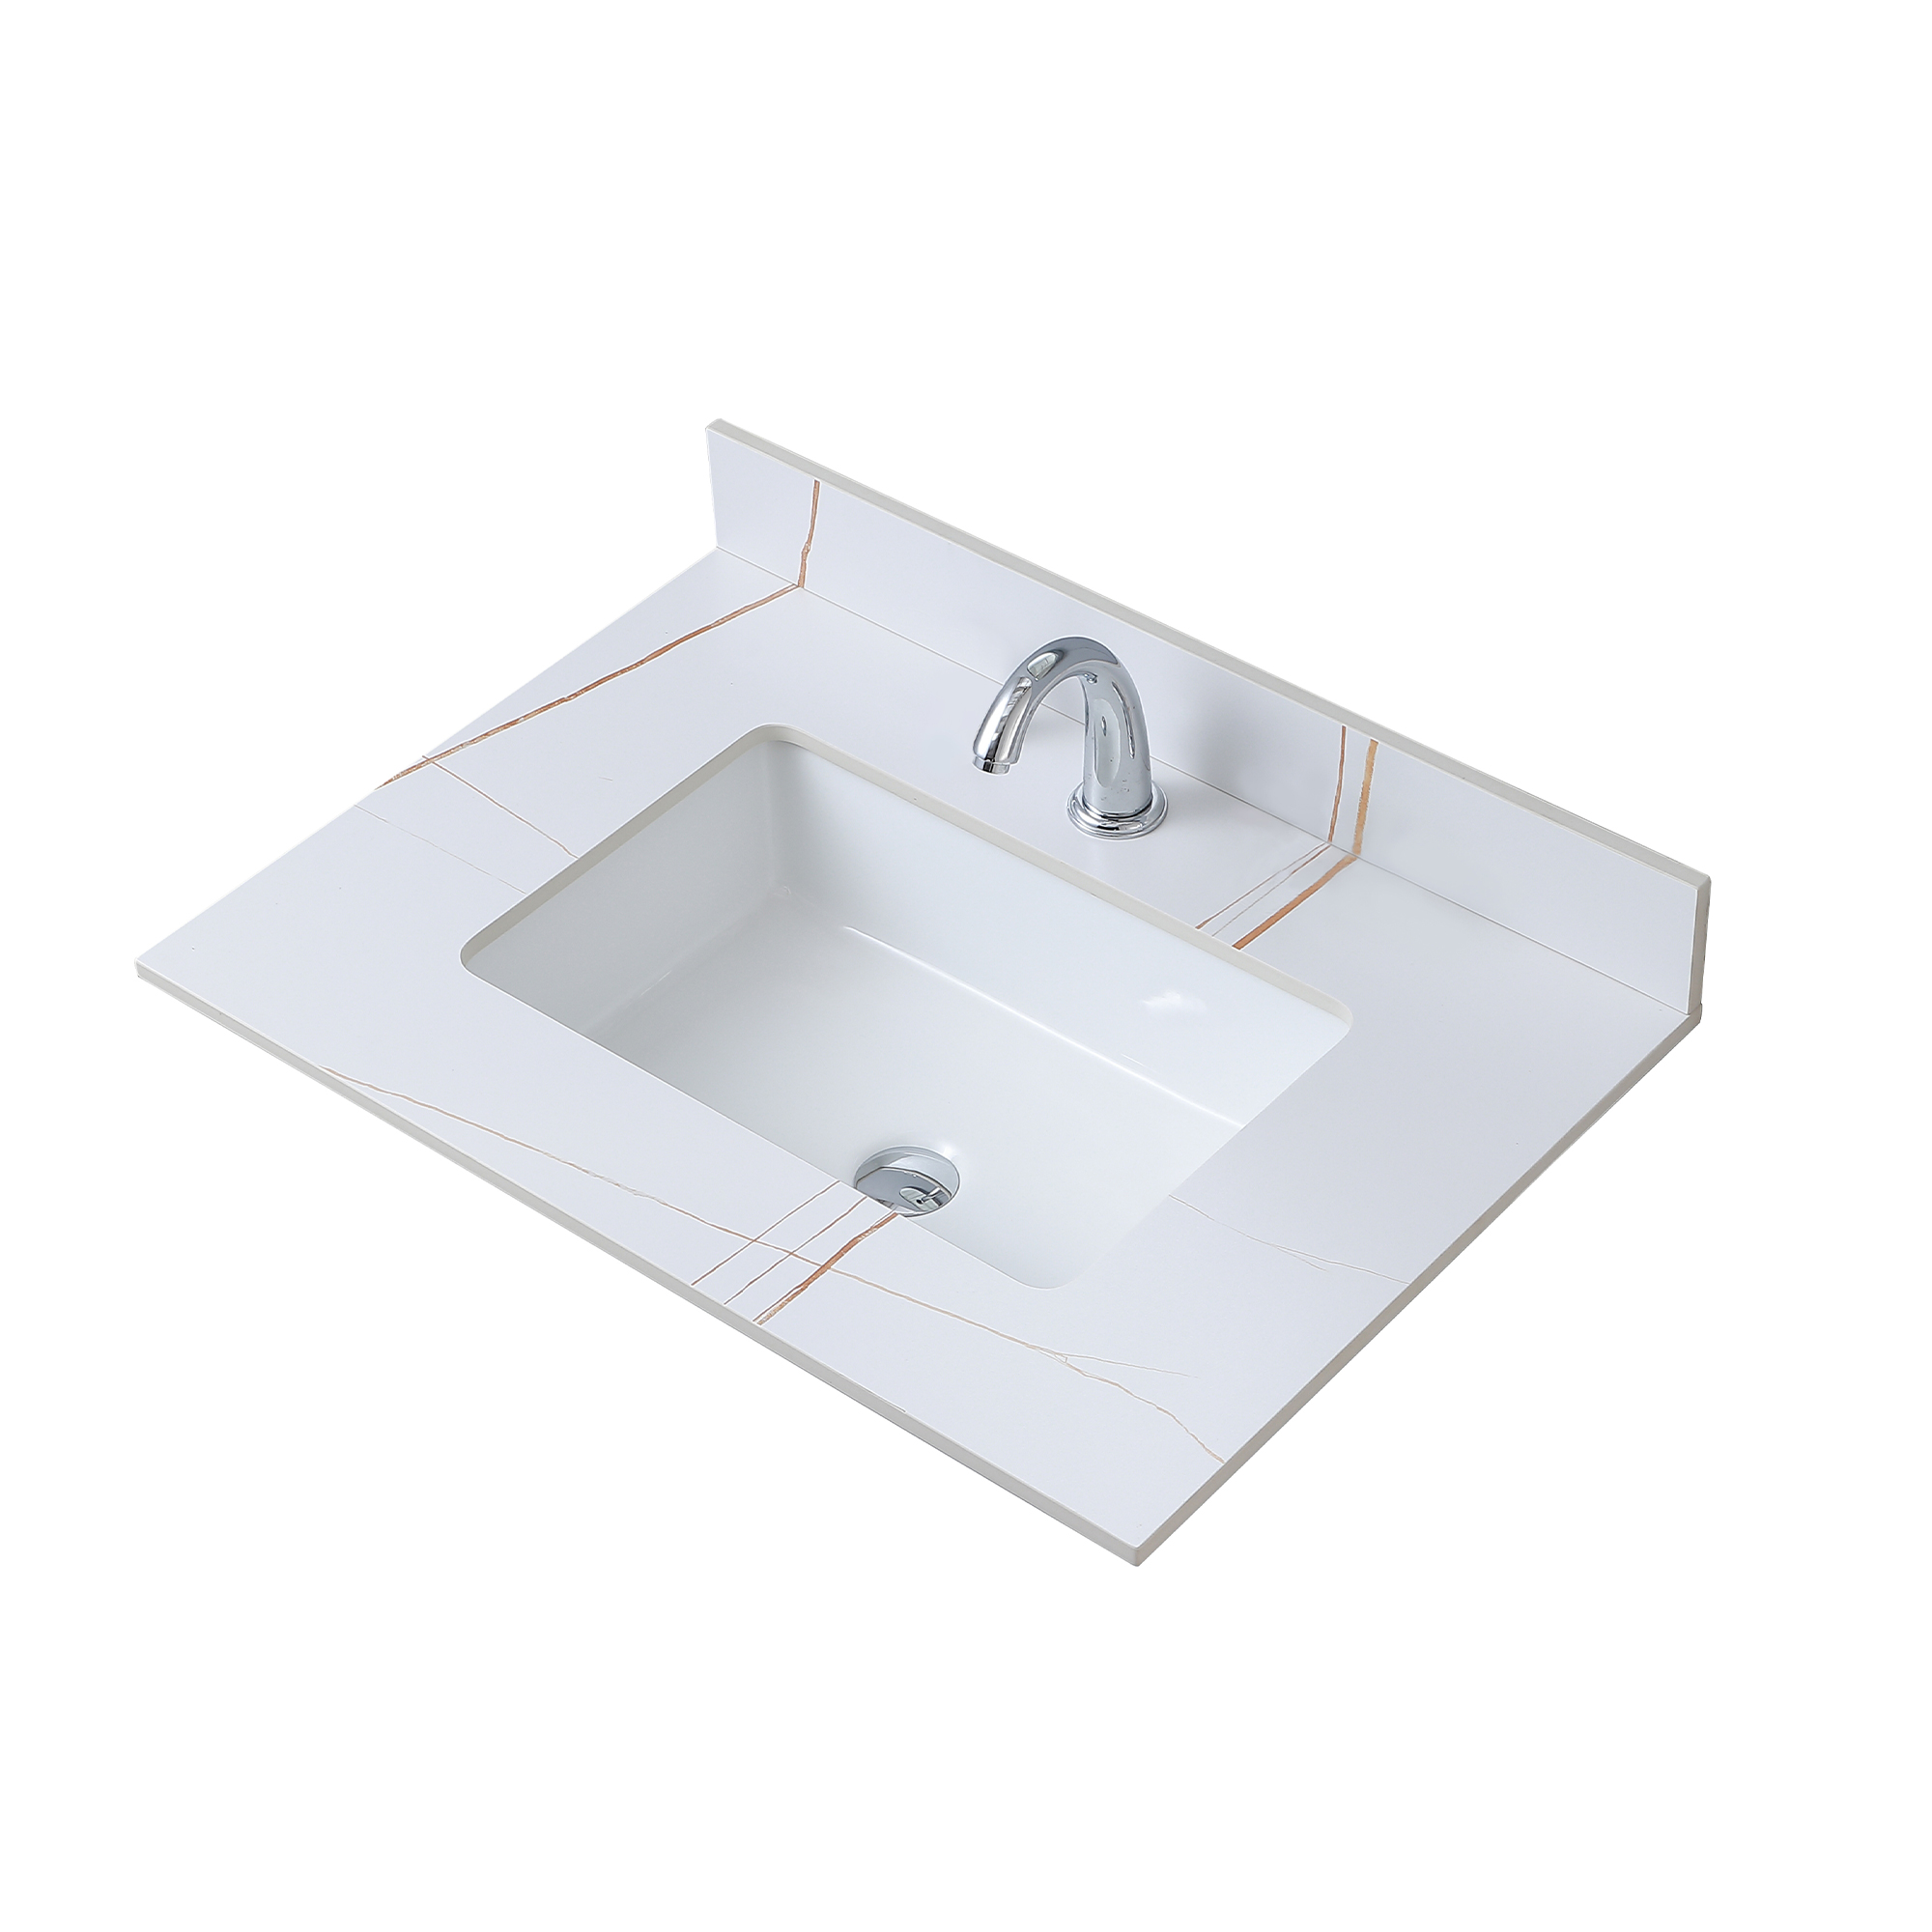 Montary 31" Bathroom Vanity Top Stone Carrara White Tops with Single Faucet Hole and Undermount Ceramic Sink